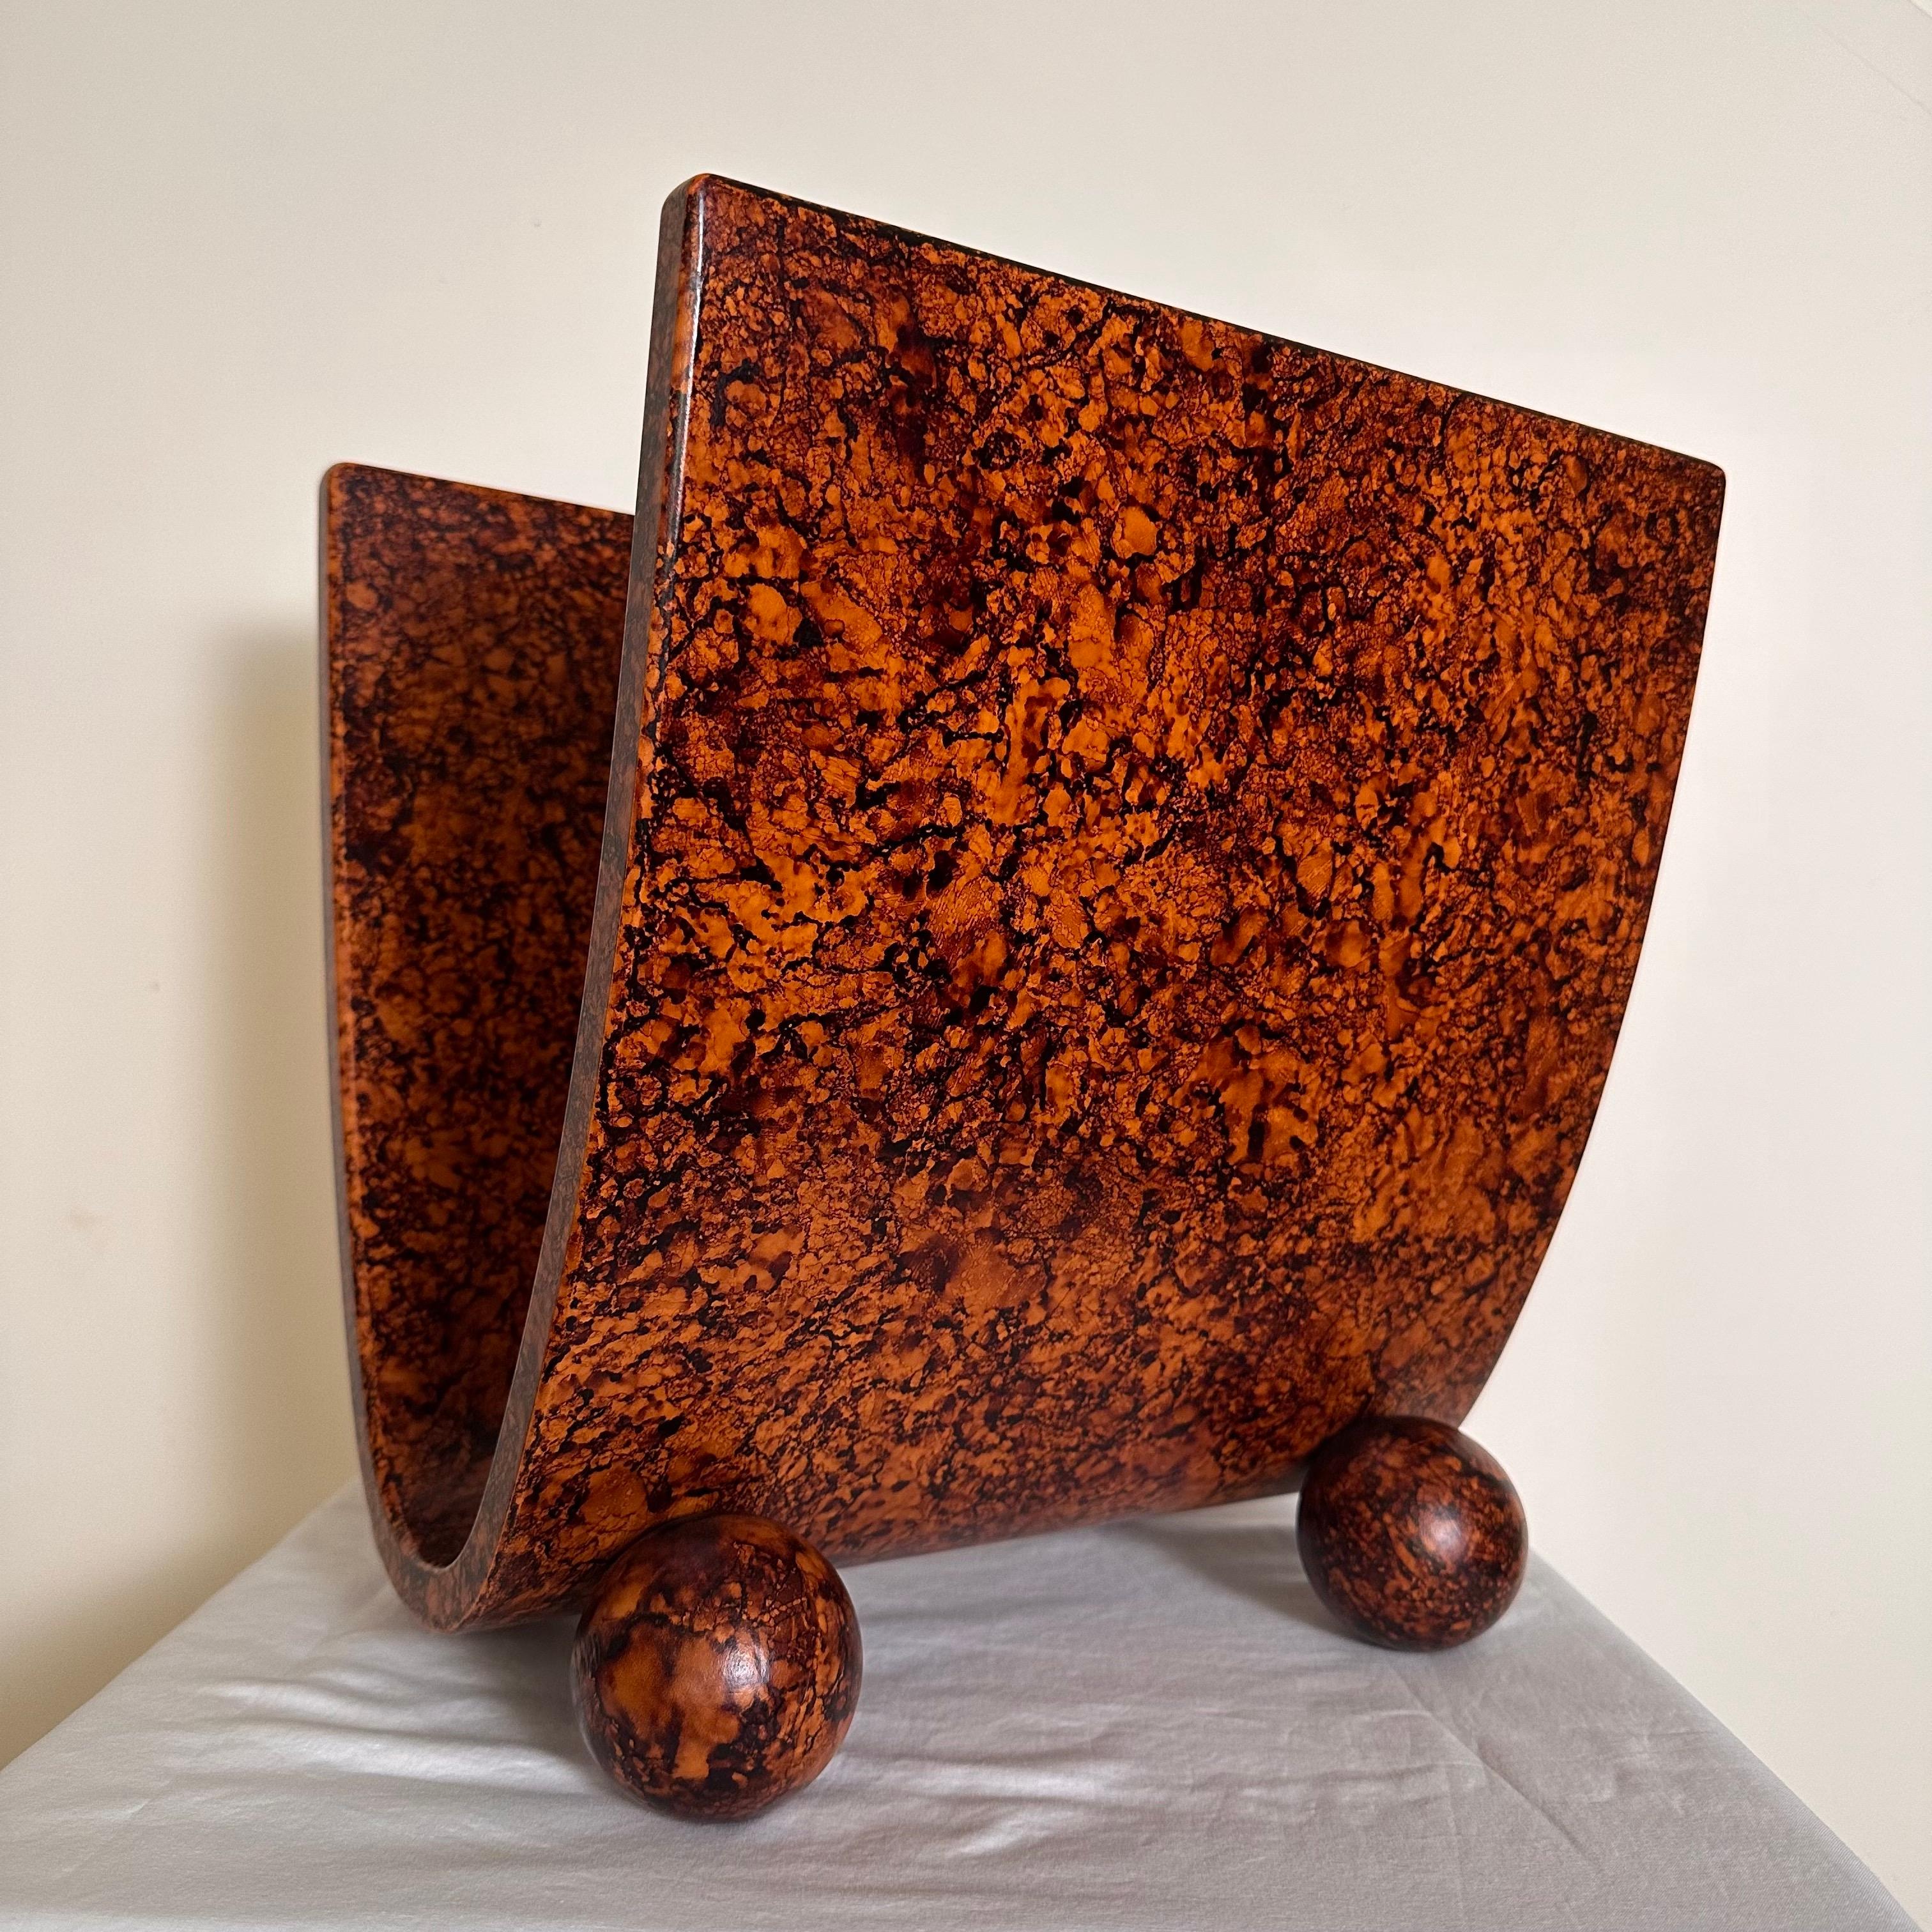 Vintage Art Deco Post Modern Style Magazine Rack in Faux Burl Wood Stain Finish For Sale 3